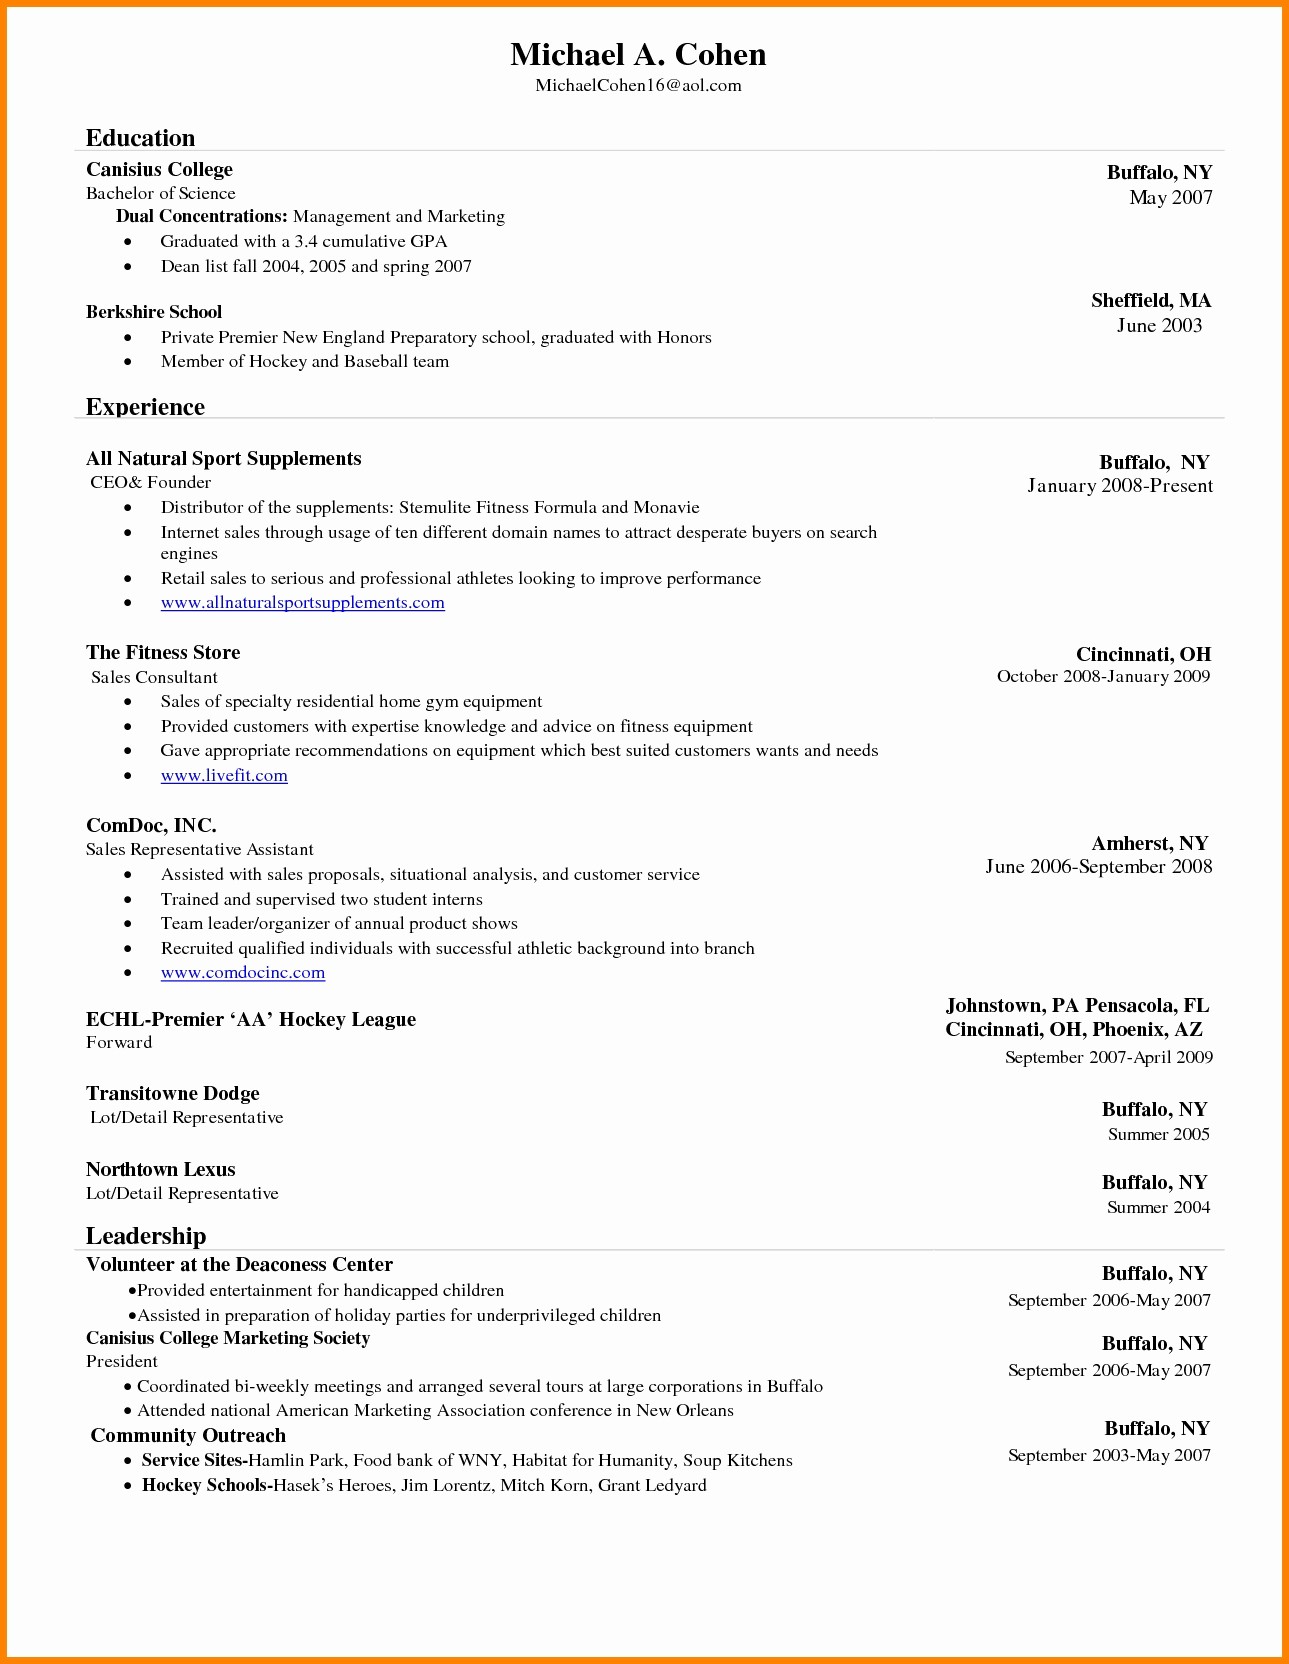 Ms Word Templates for Resumes Beautiful Resume Template Microsoft Word 2017